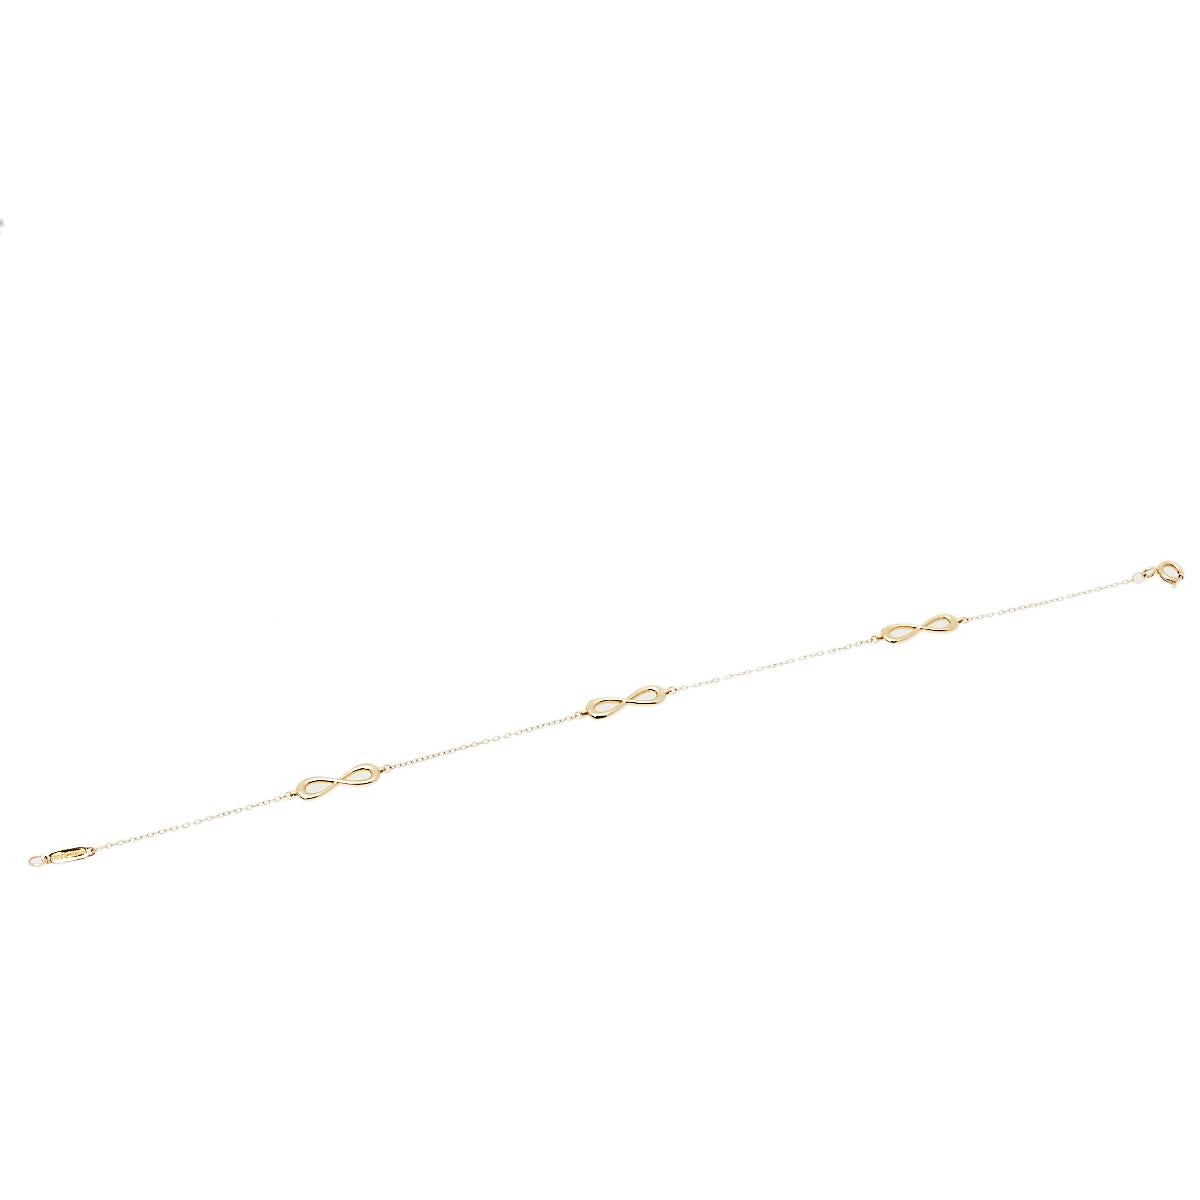 The Infinity collection by Tiffany & Co. stands to powerfully symbolize a continuous flow of connection, energy, and vitality. The label smoothly blends the meaning of Infinity with timeless charm and infuses it into this bracelet. The piece comes